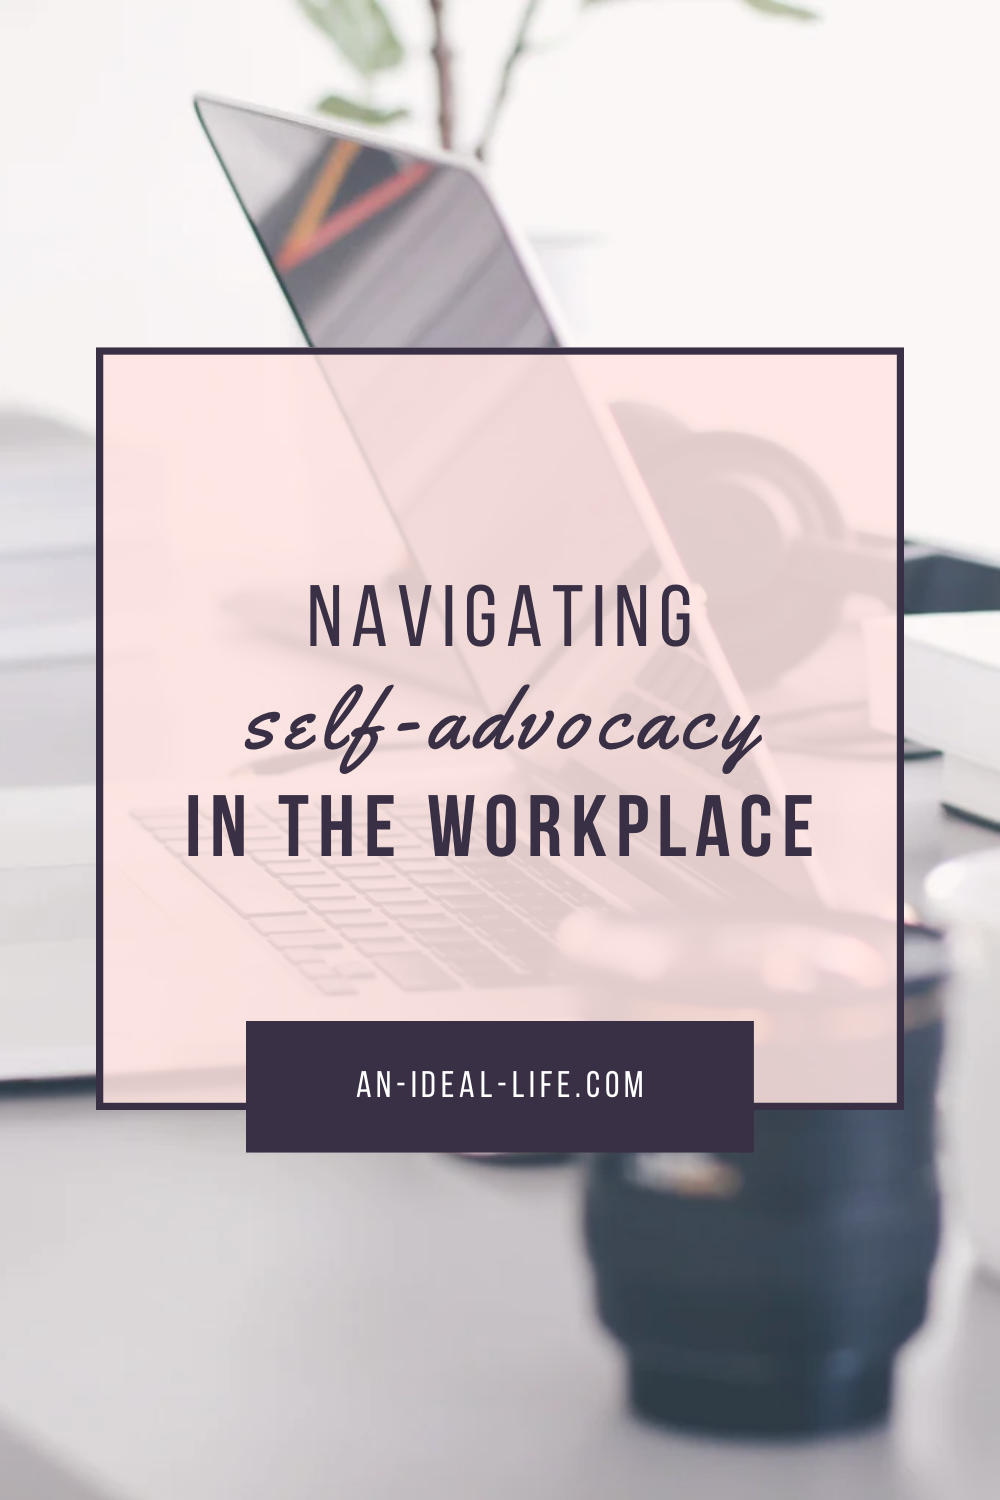 Navigating Chronic Illness Self-Advocacy in the Workplace